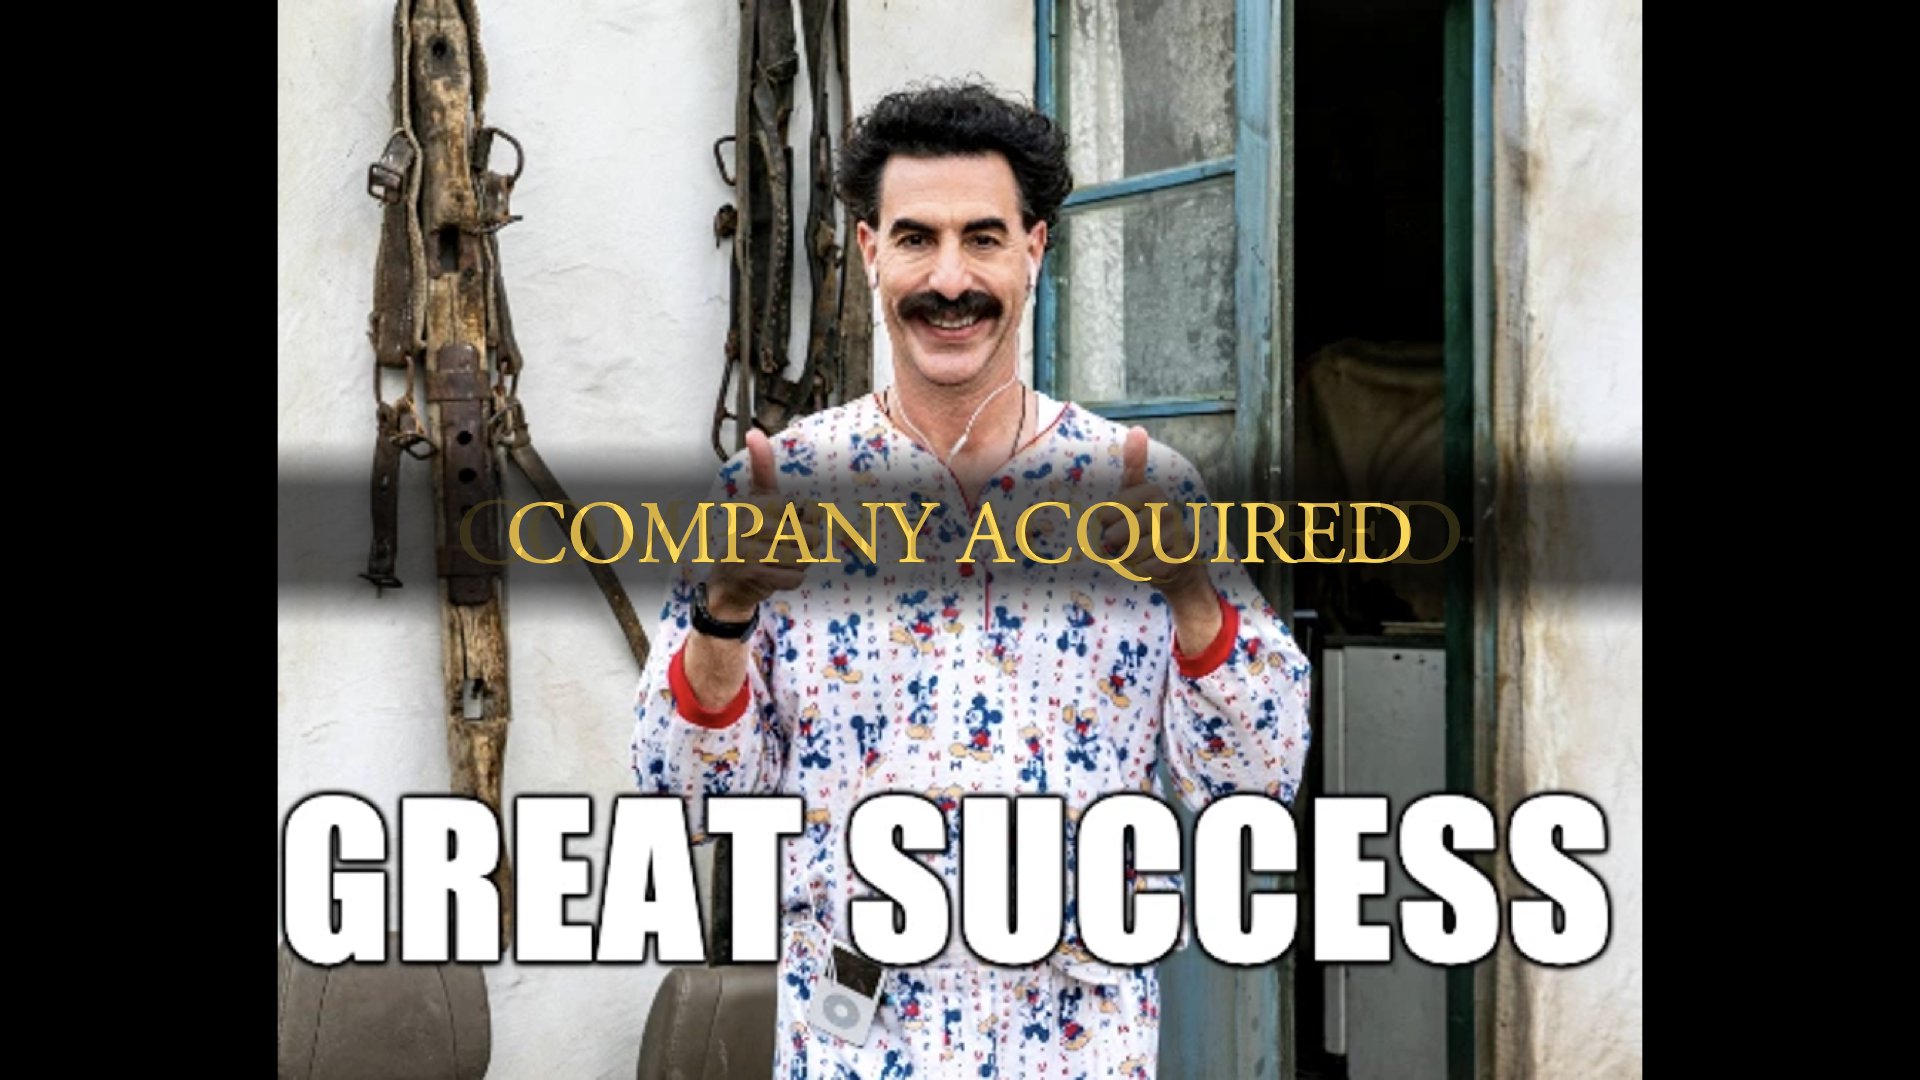 Borat holding two thumbs up with the caption 'Great success'. The words 'Company acquired' are overlaid on top of the image like in Dark Souls when you kill a boss or something.